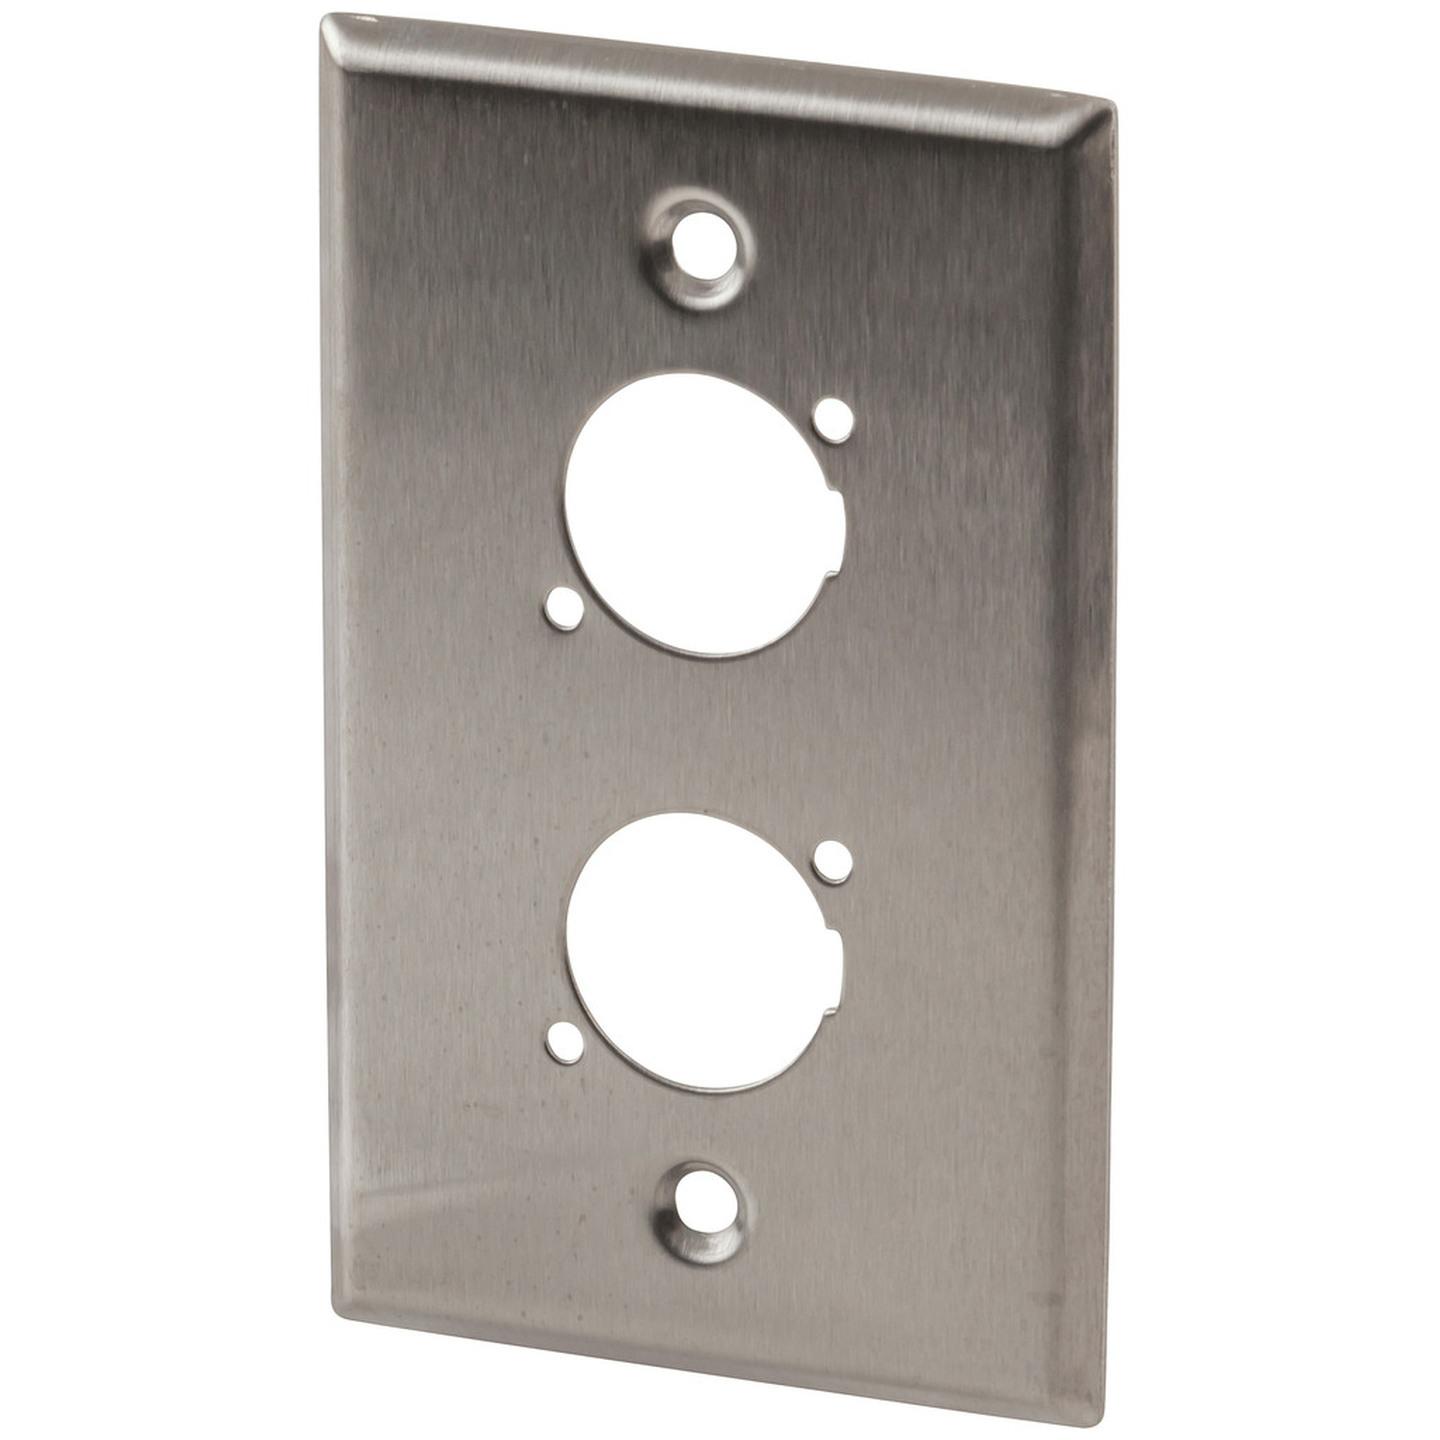 Stainless Steel Wall Plate Dual XLR